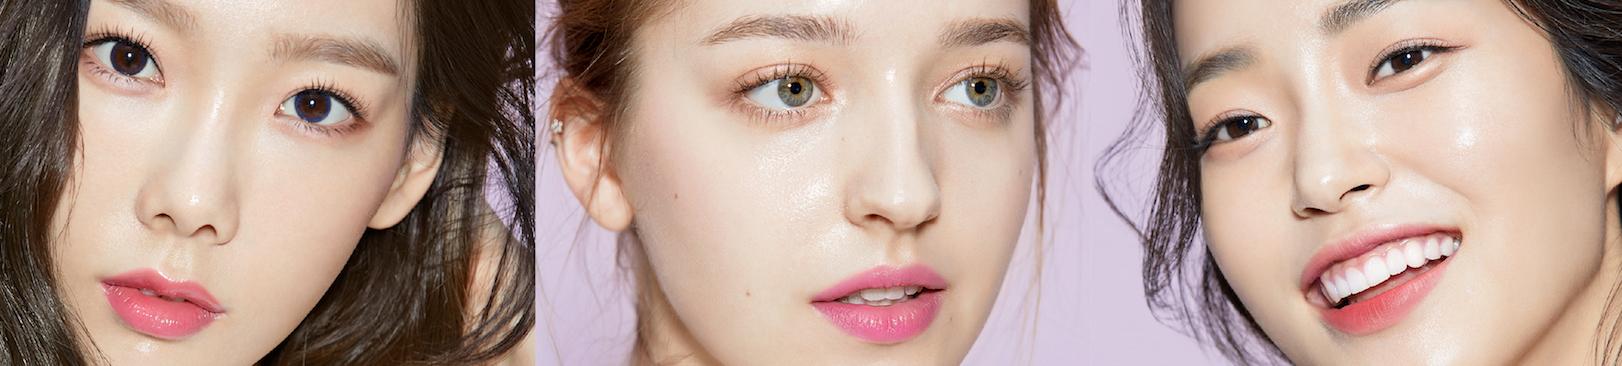 For Banila Co, That Makeup Look You Got Goin’ On? It All Starts With Skincare